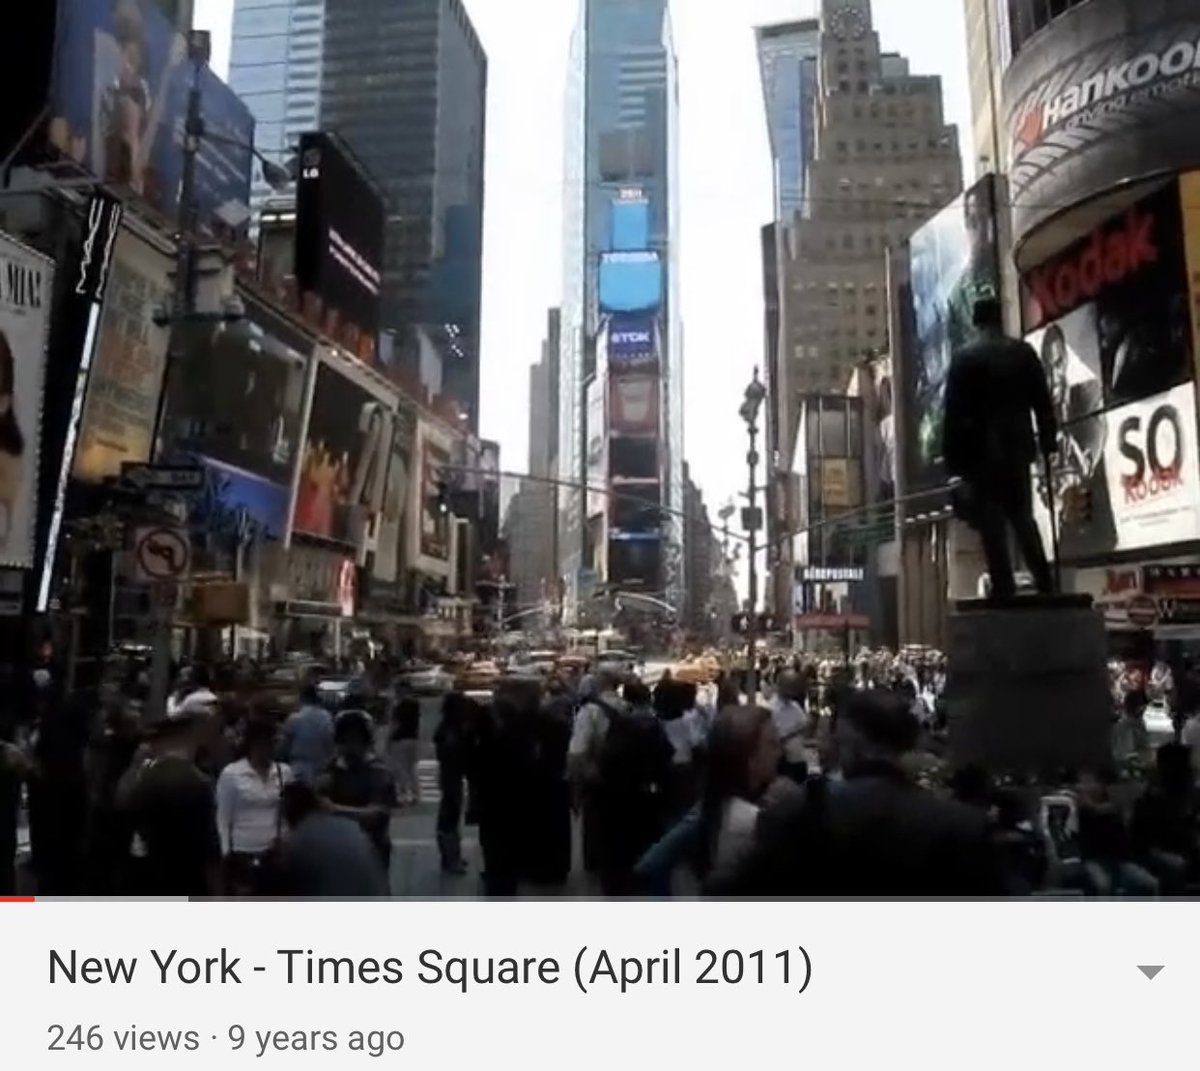 I started watching random YouTube videos and looking for images from April 2011 in Times Square. No clear view of the poster. Wes started scouring Bing and google street view.